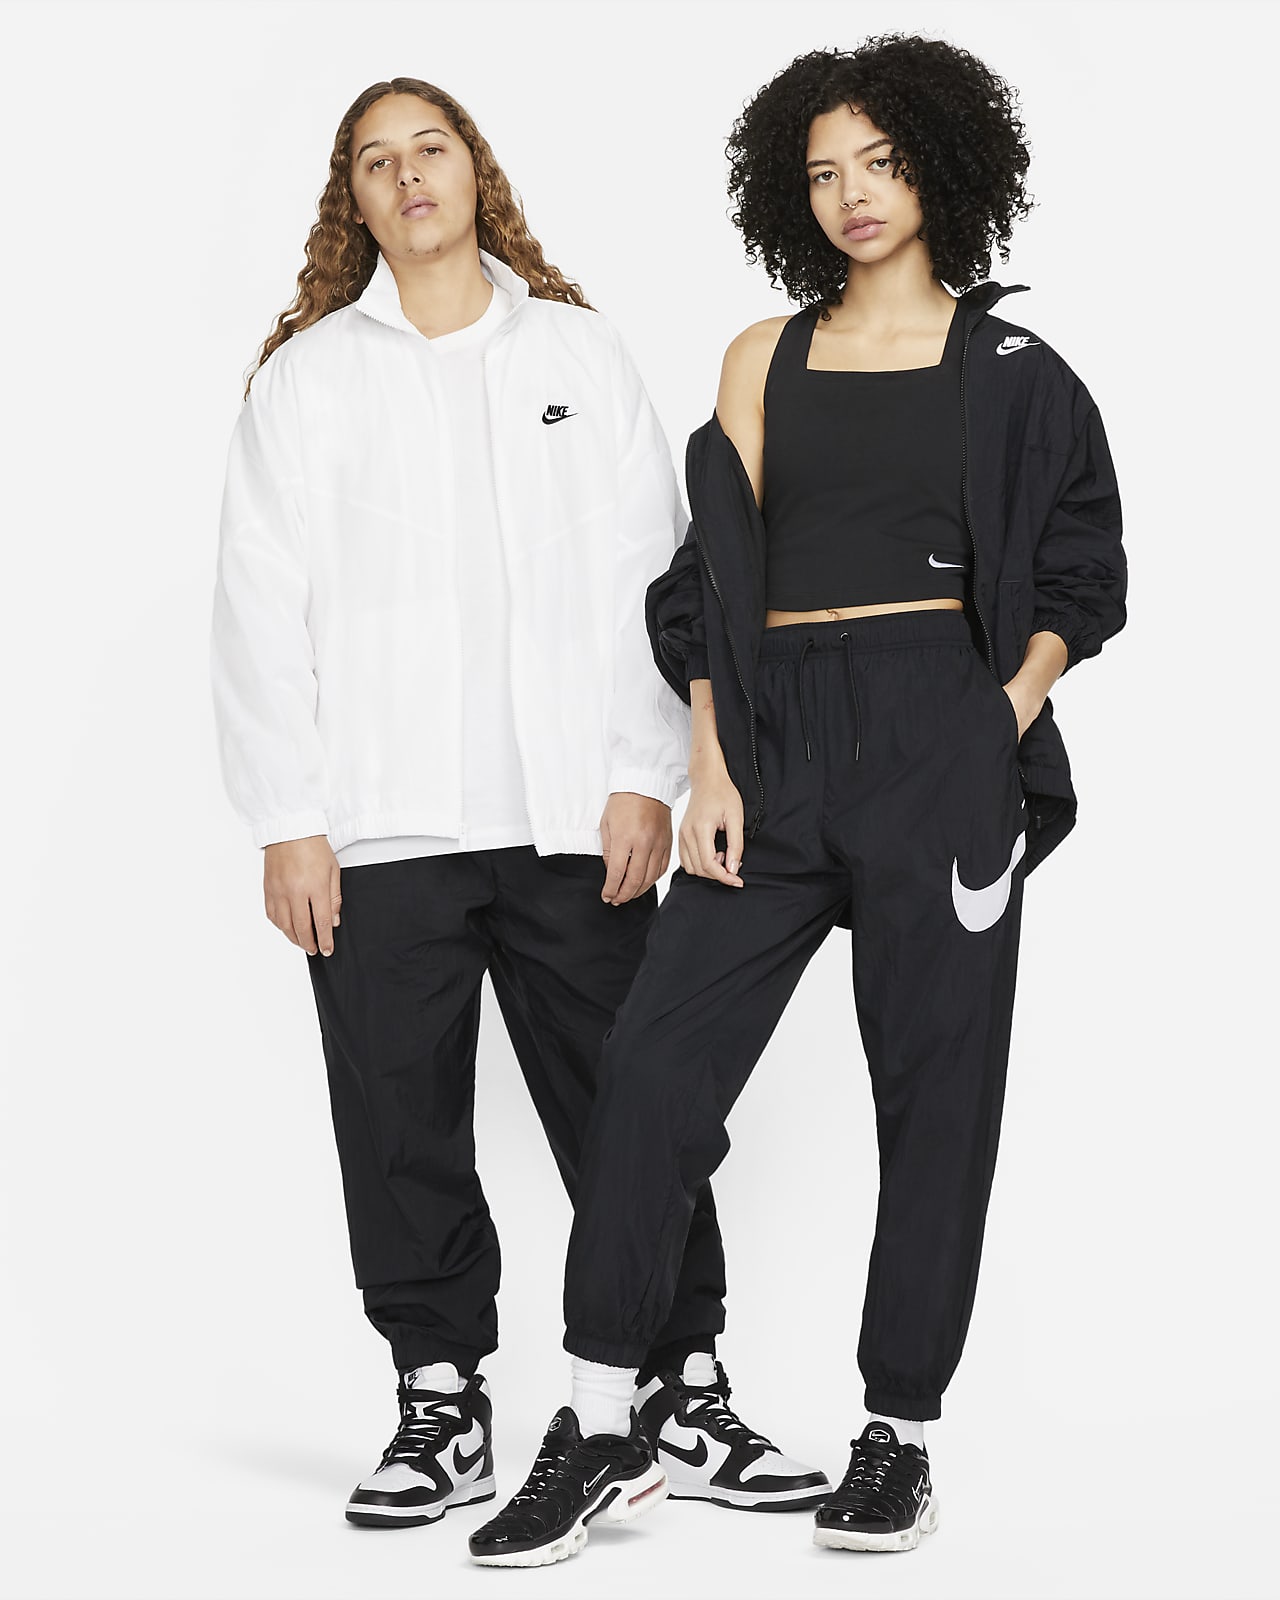 https://static.nike.com/a/images/t_PDP_1280_v1/f_auto,q_auto:eco/fd3db309-e5b2-4df7-bc3f-d6fd7e188479/sportswear-essential-mid-rise-trousers-mhZzLf.png